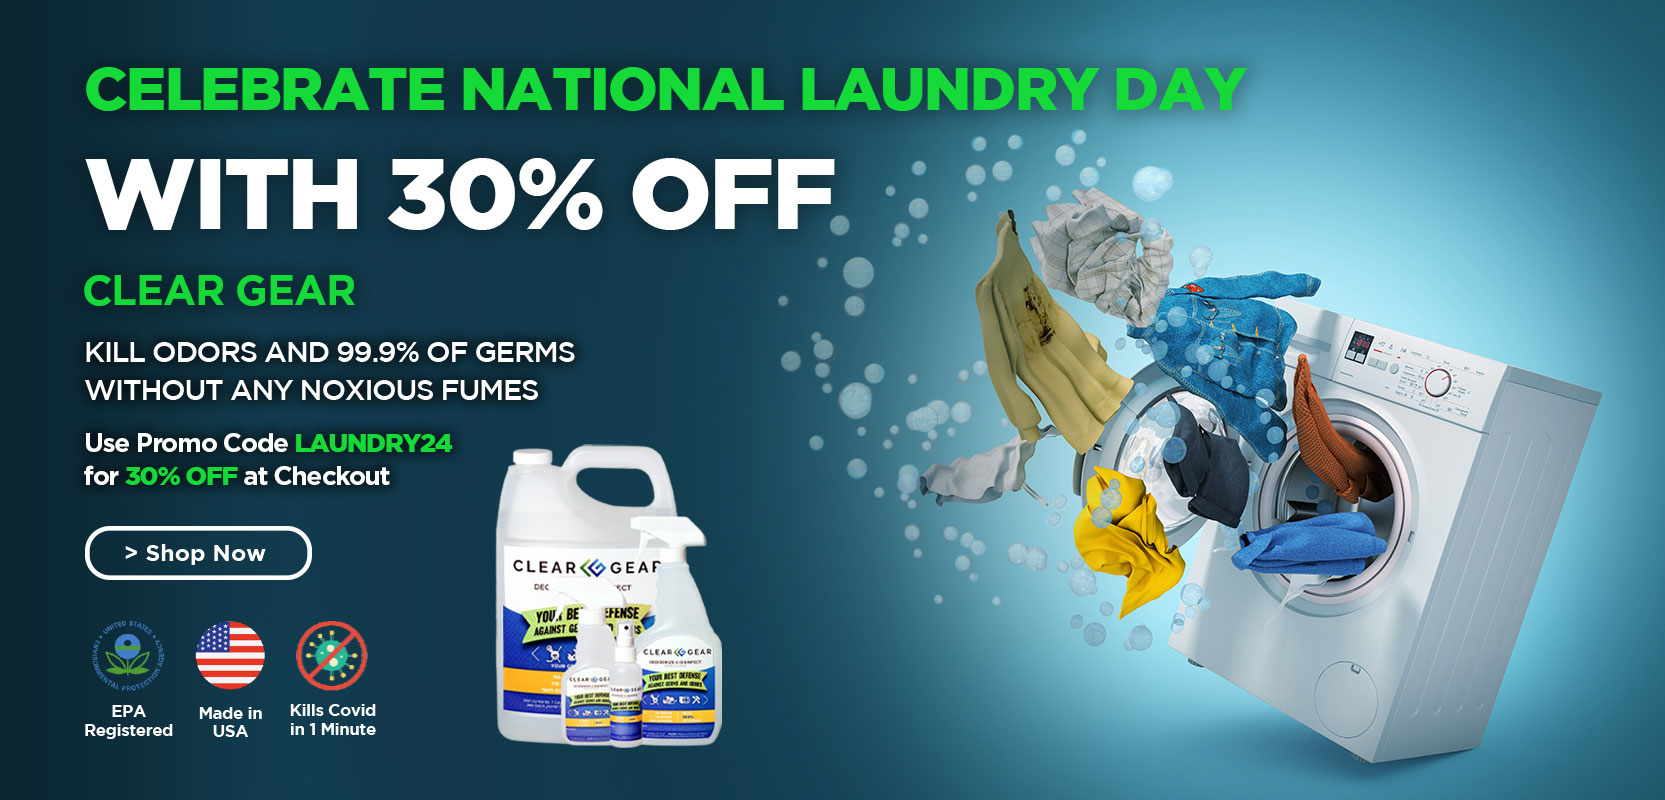 National Laundry Day 30% off deal, use promo code LAUNDRY24